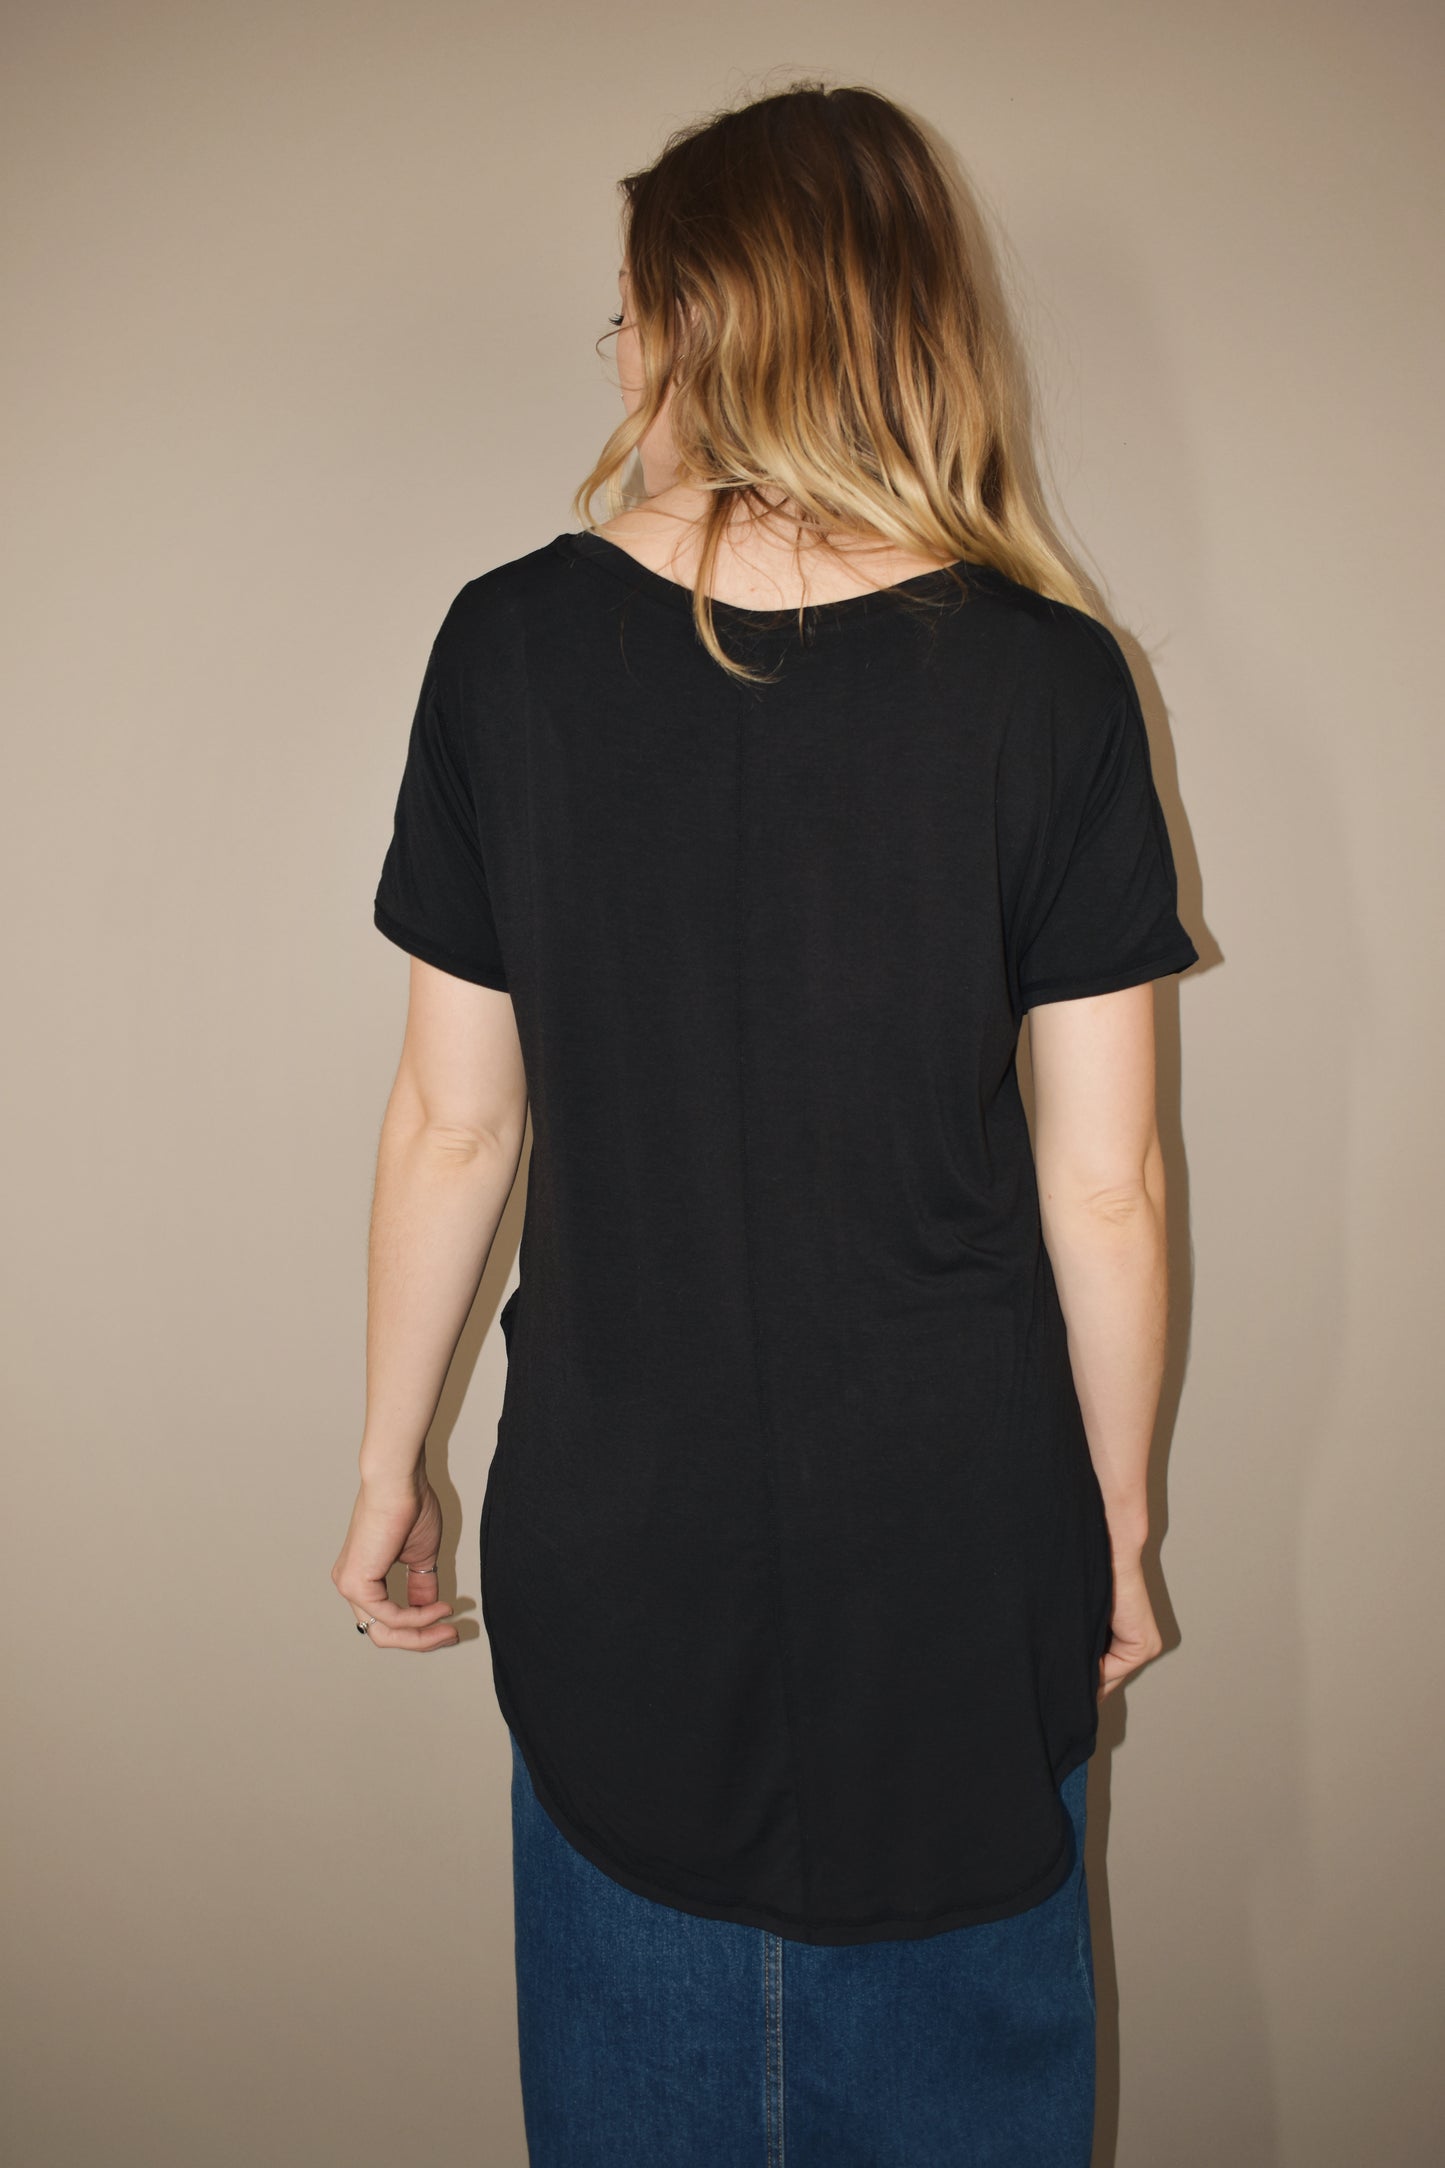 basic athleisure short sleeve flowy high low tee with slits on side, full length. stretchy athletic fabric